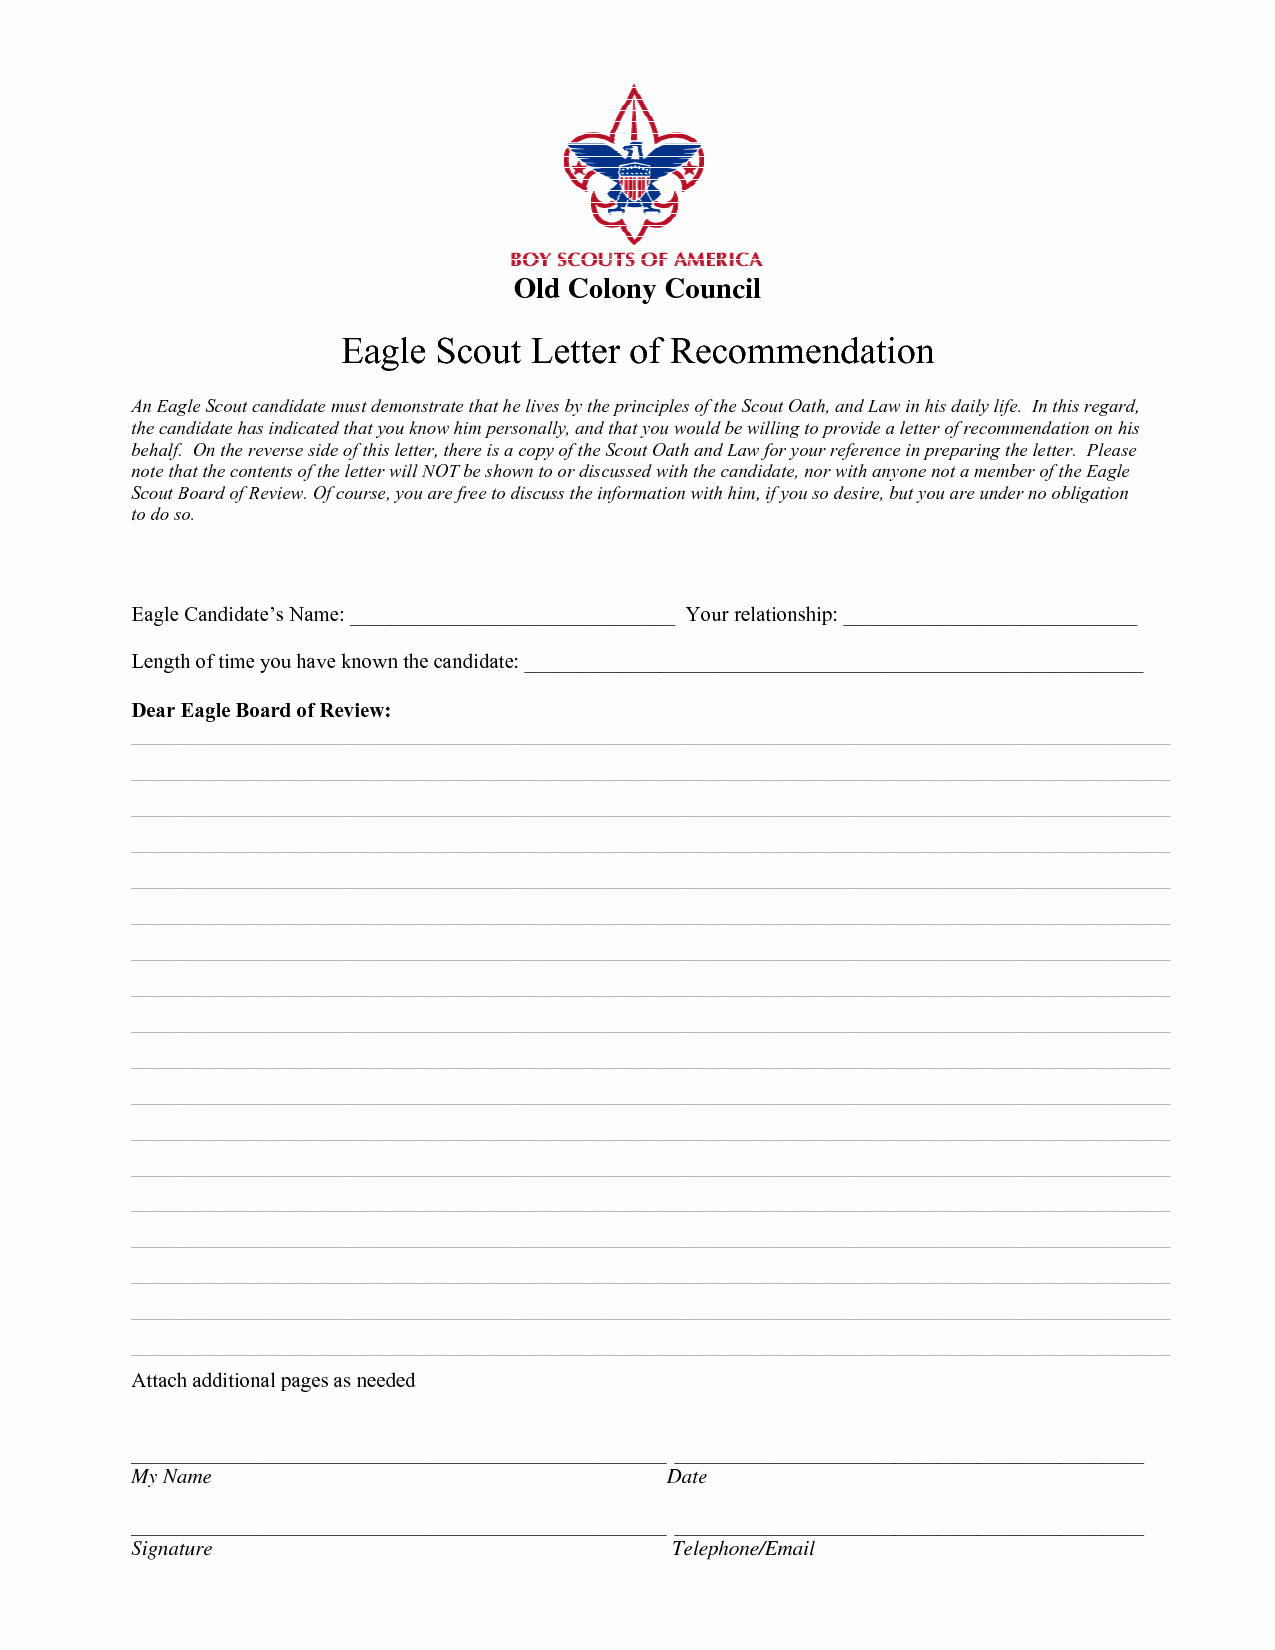 Eagle Letter Of Recommendation form New Eagle Scout Letter Re Mendation Sample From